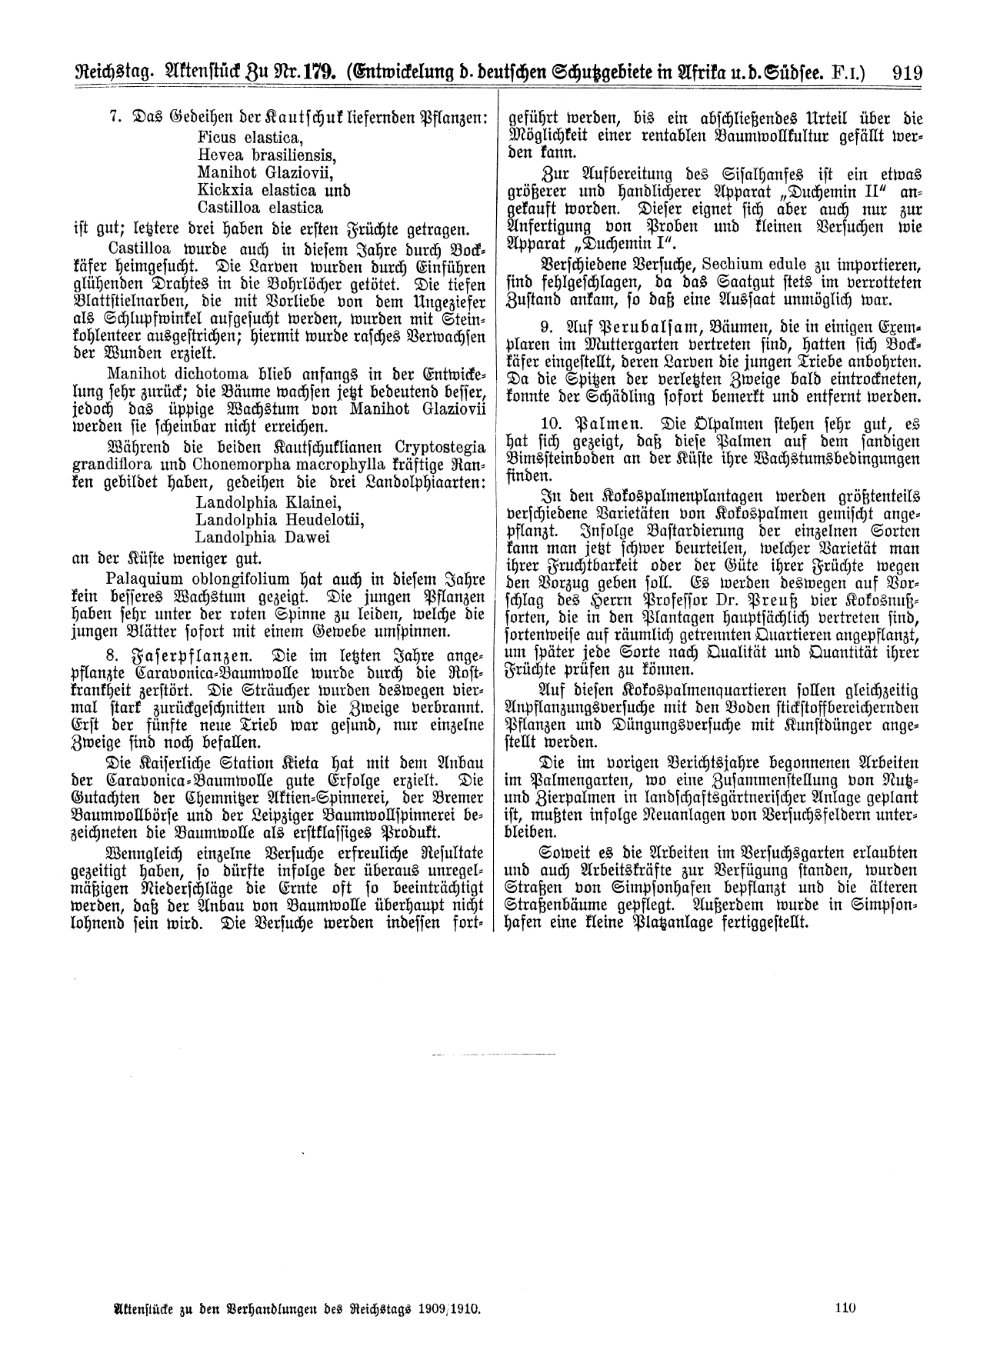 Scan of page 919